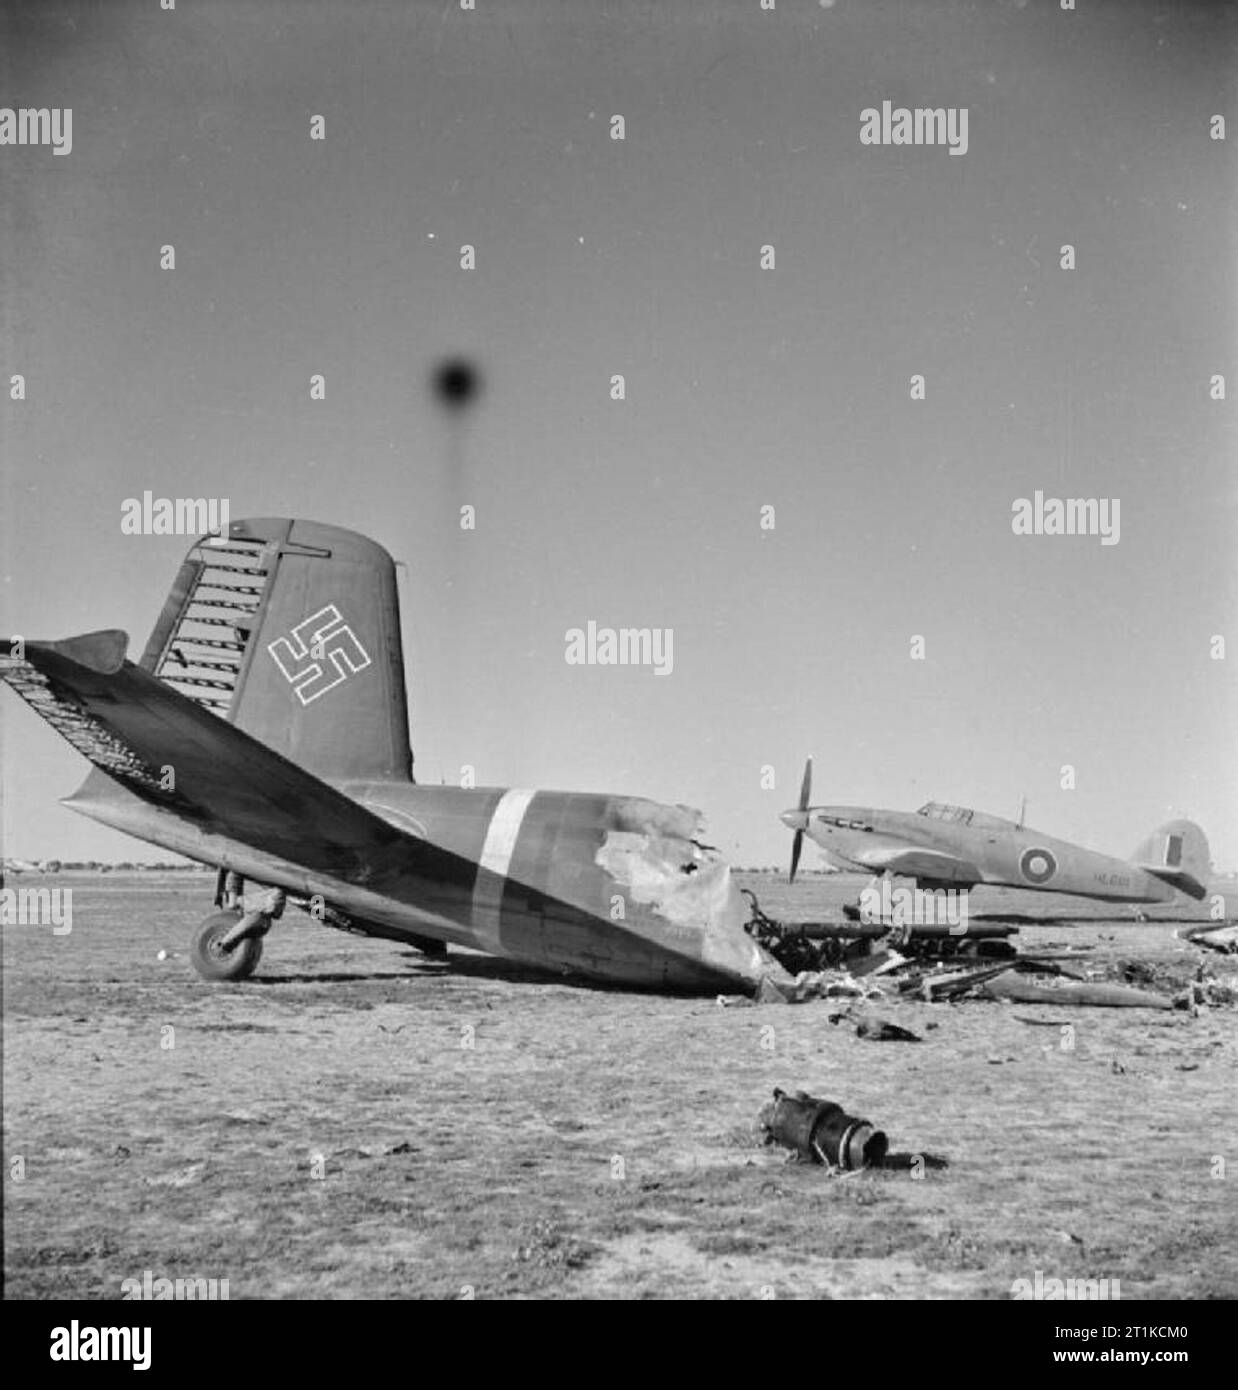 Royal Air Force- Operations in the Middle East and North Africa, 1939-1943. Behind the wreckage of a burnt-out Focke Wulf FW 200 Condor, Hawker Hurricane Mark IIB, HL681 'A', of No. 274 Squadron RAF, stands on the landing ground at Castel Benito, Tripolitania, after its capture. 274 Squadron were temporarily installed there until the airfield at Mellaha could be made serviceable for use. Stock Photo